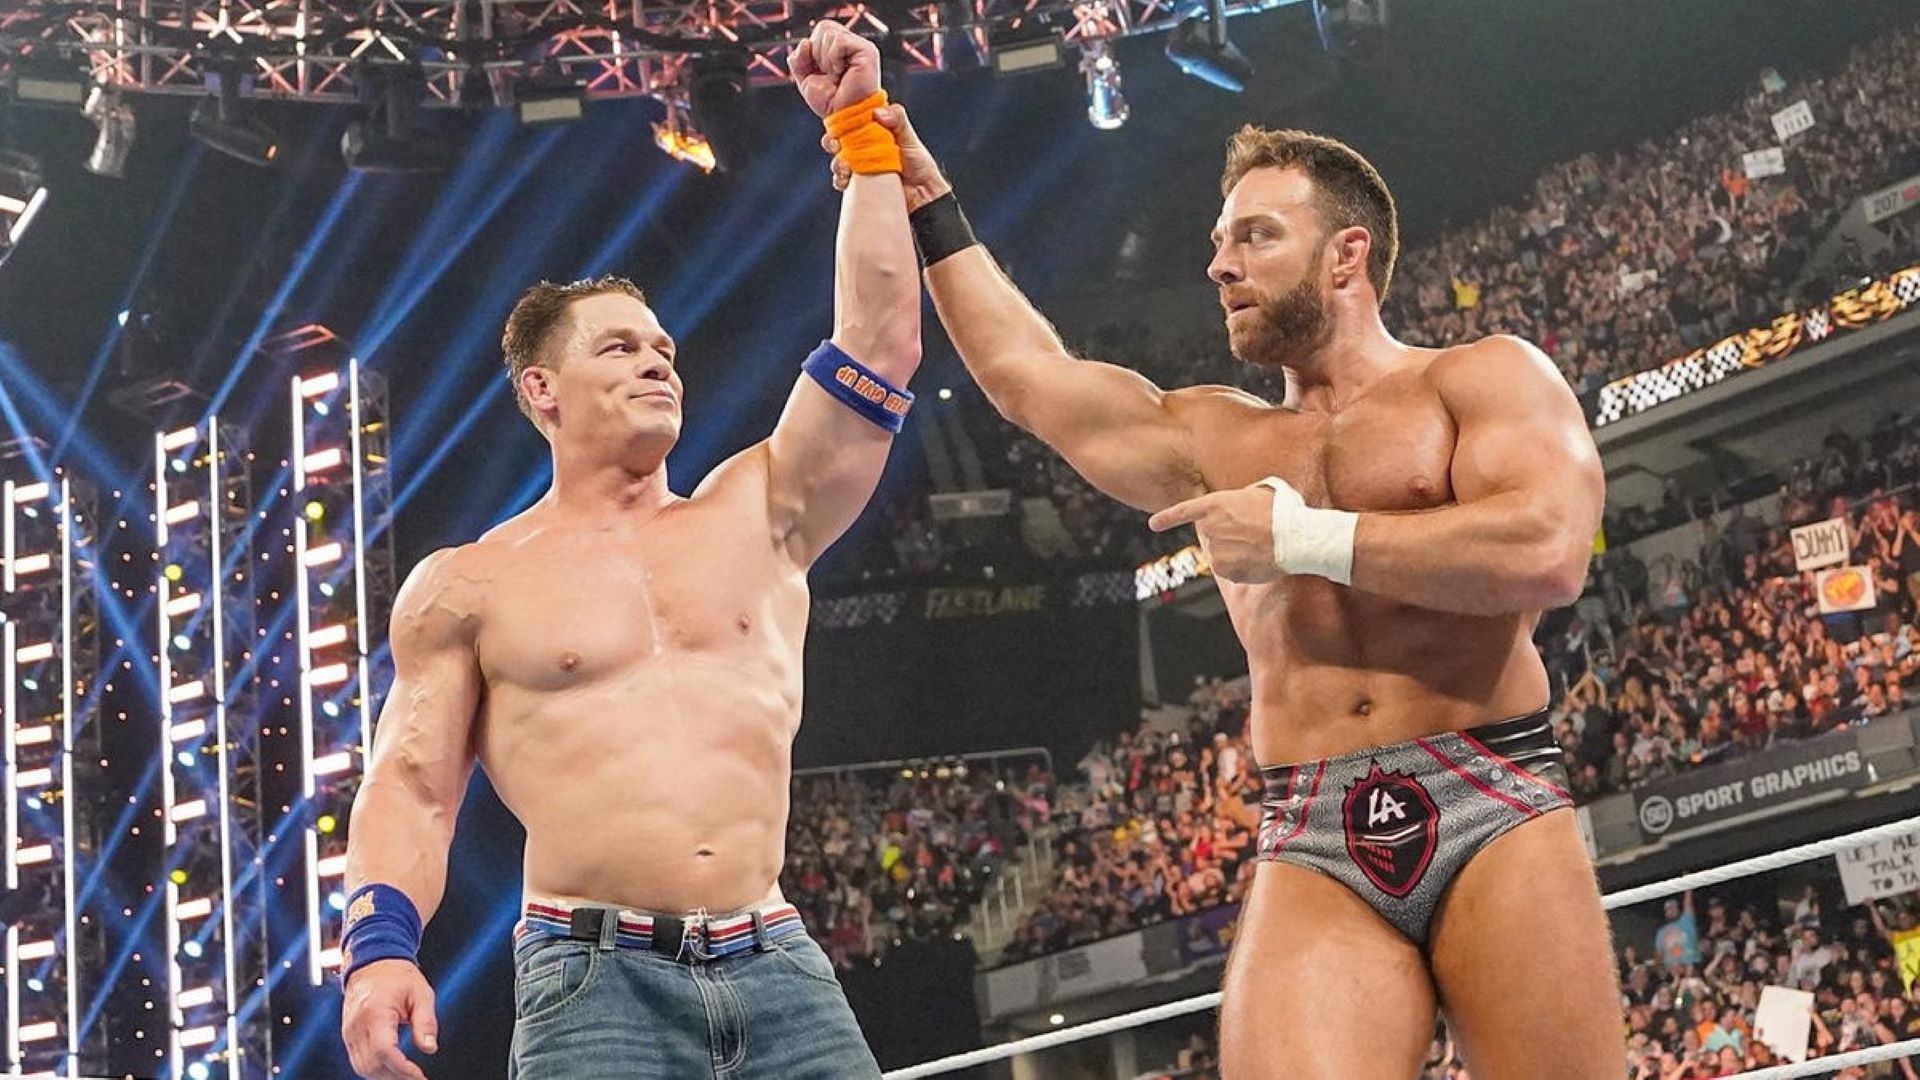 Cena and Knight had different paths to WWE